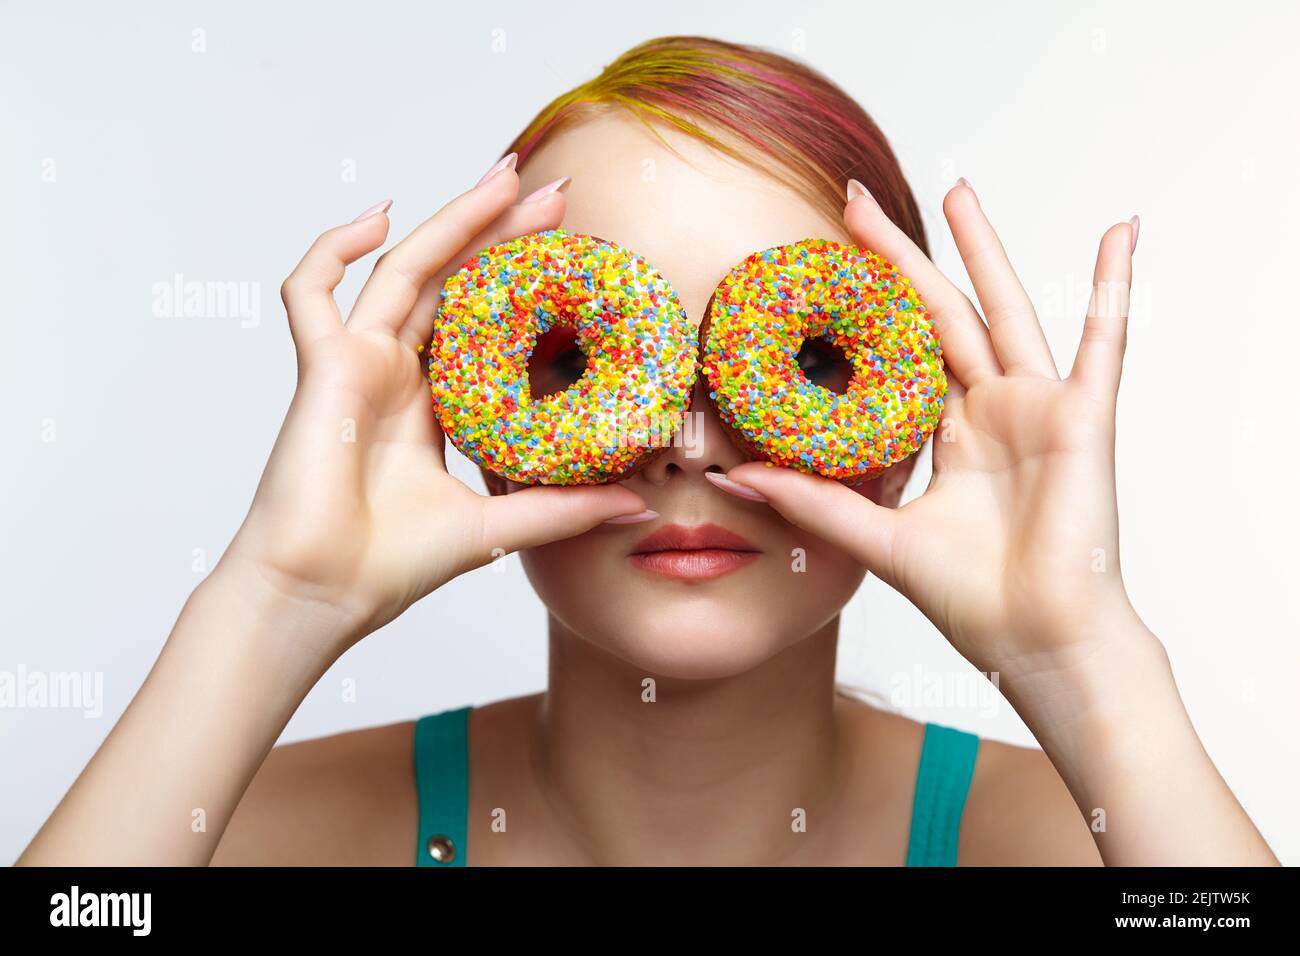 Teenager girl with unusual face art make-up . Child with donuts in hands closing eyes and looking through holes in donuts. Sweet tooth concept. Stock Photo